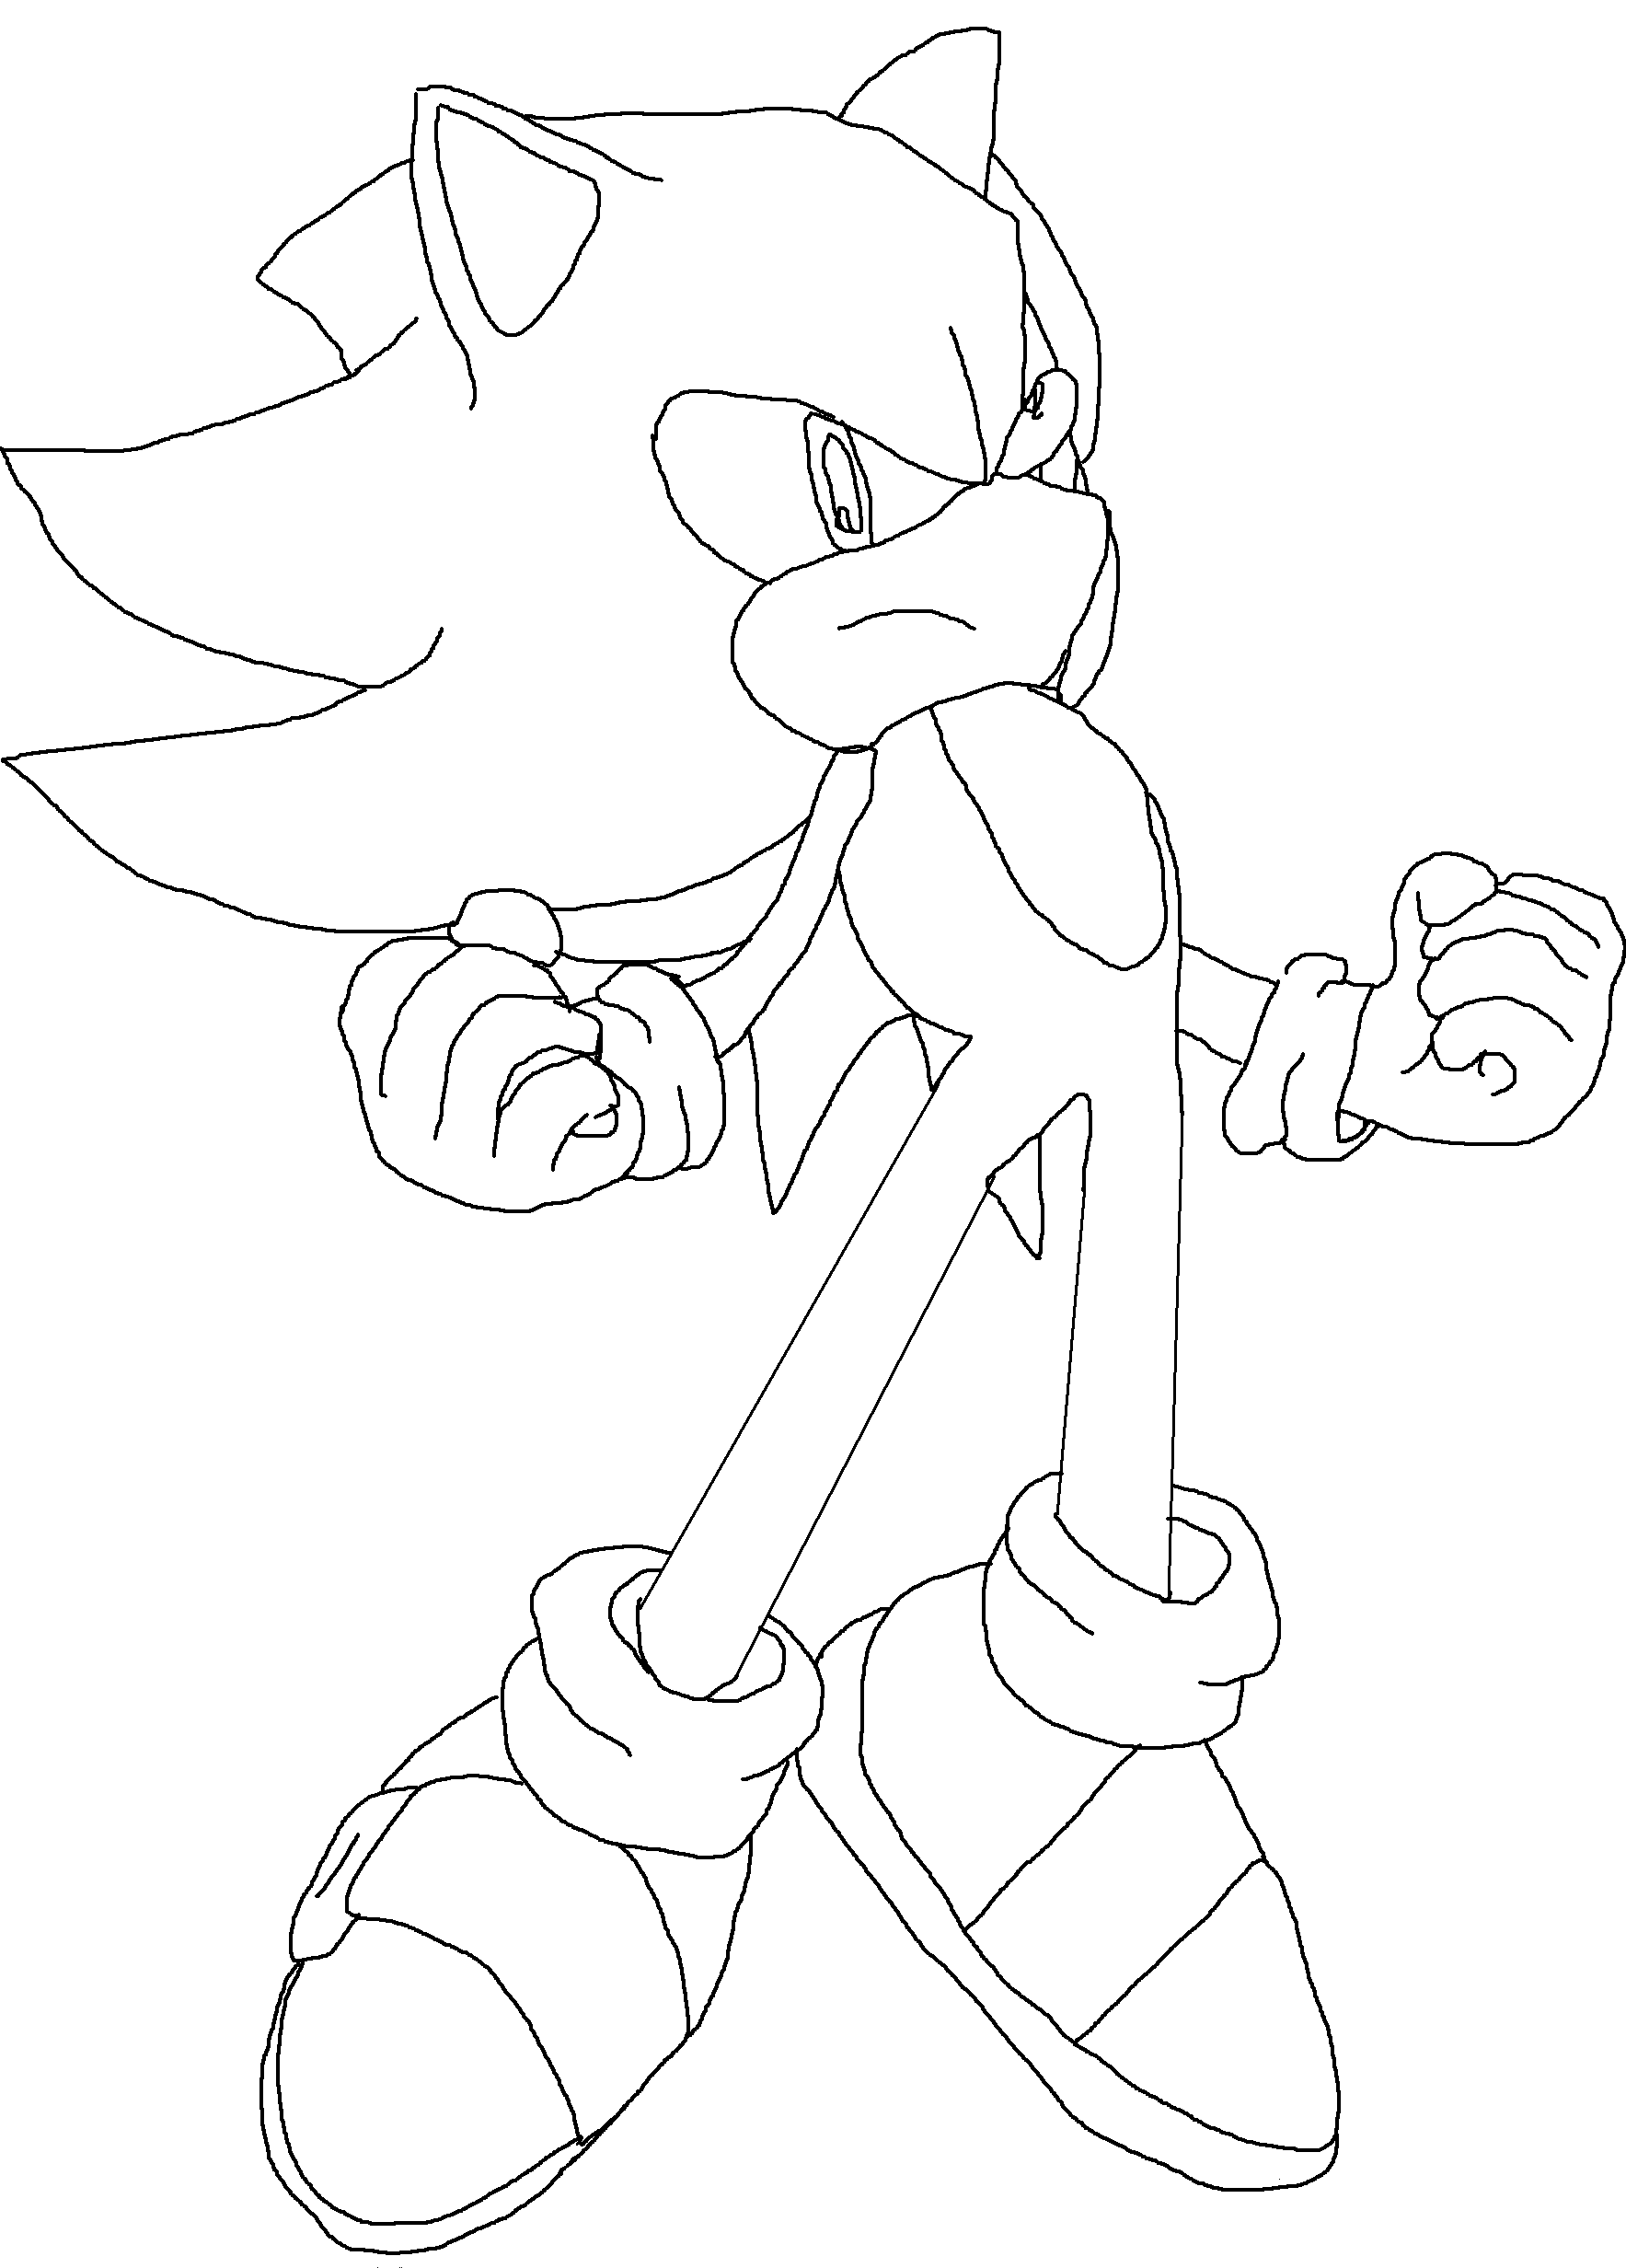 Super Sonic And Super Shadow - Coloring Pages for Kids and for Adults